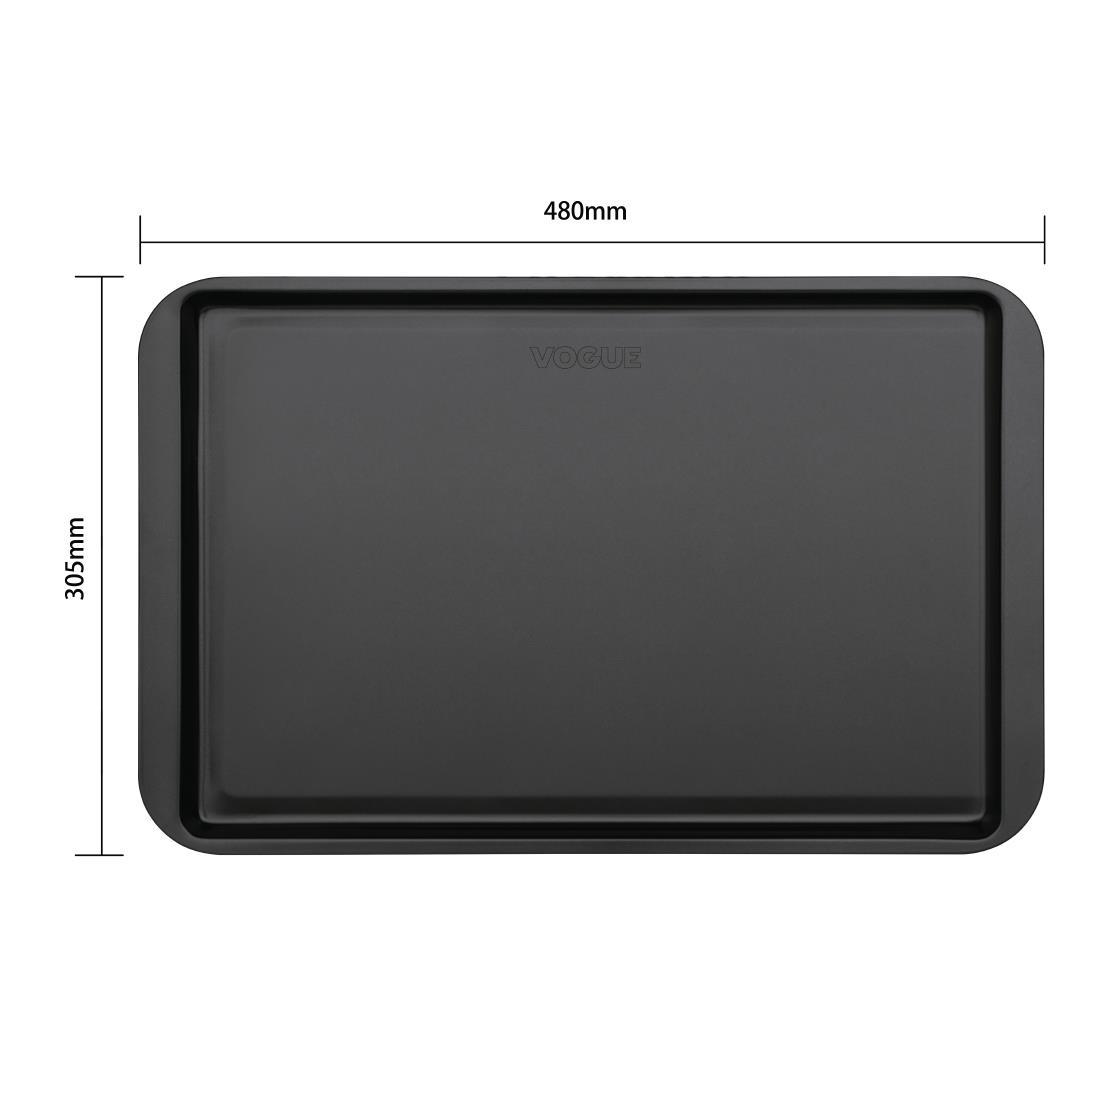 Vogue Non-Stick Carbon Steel Baking Tray 482 x 305mm - GD016  - 4